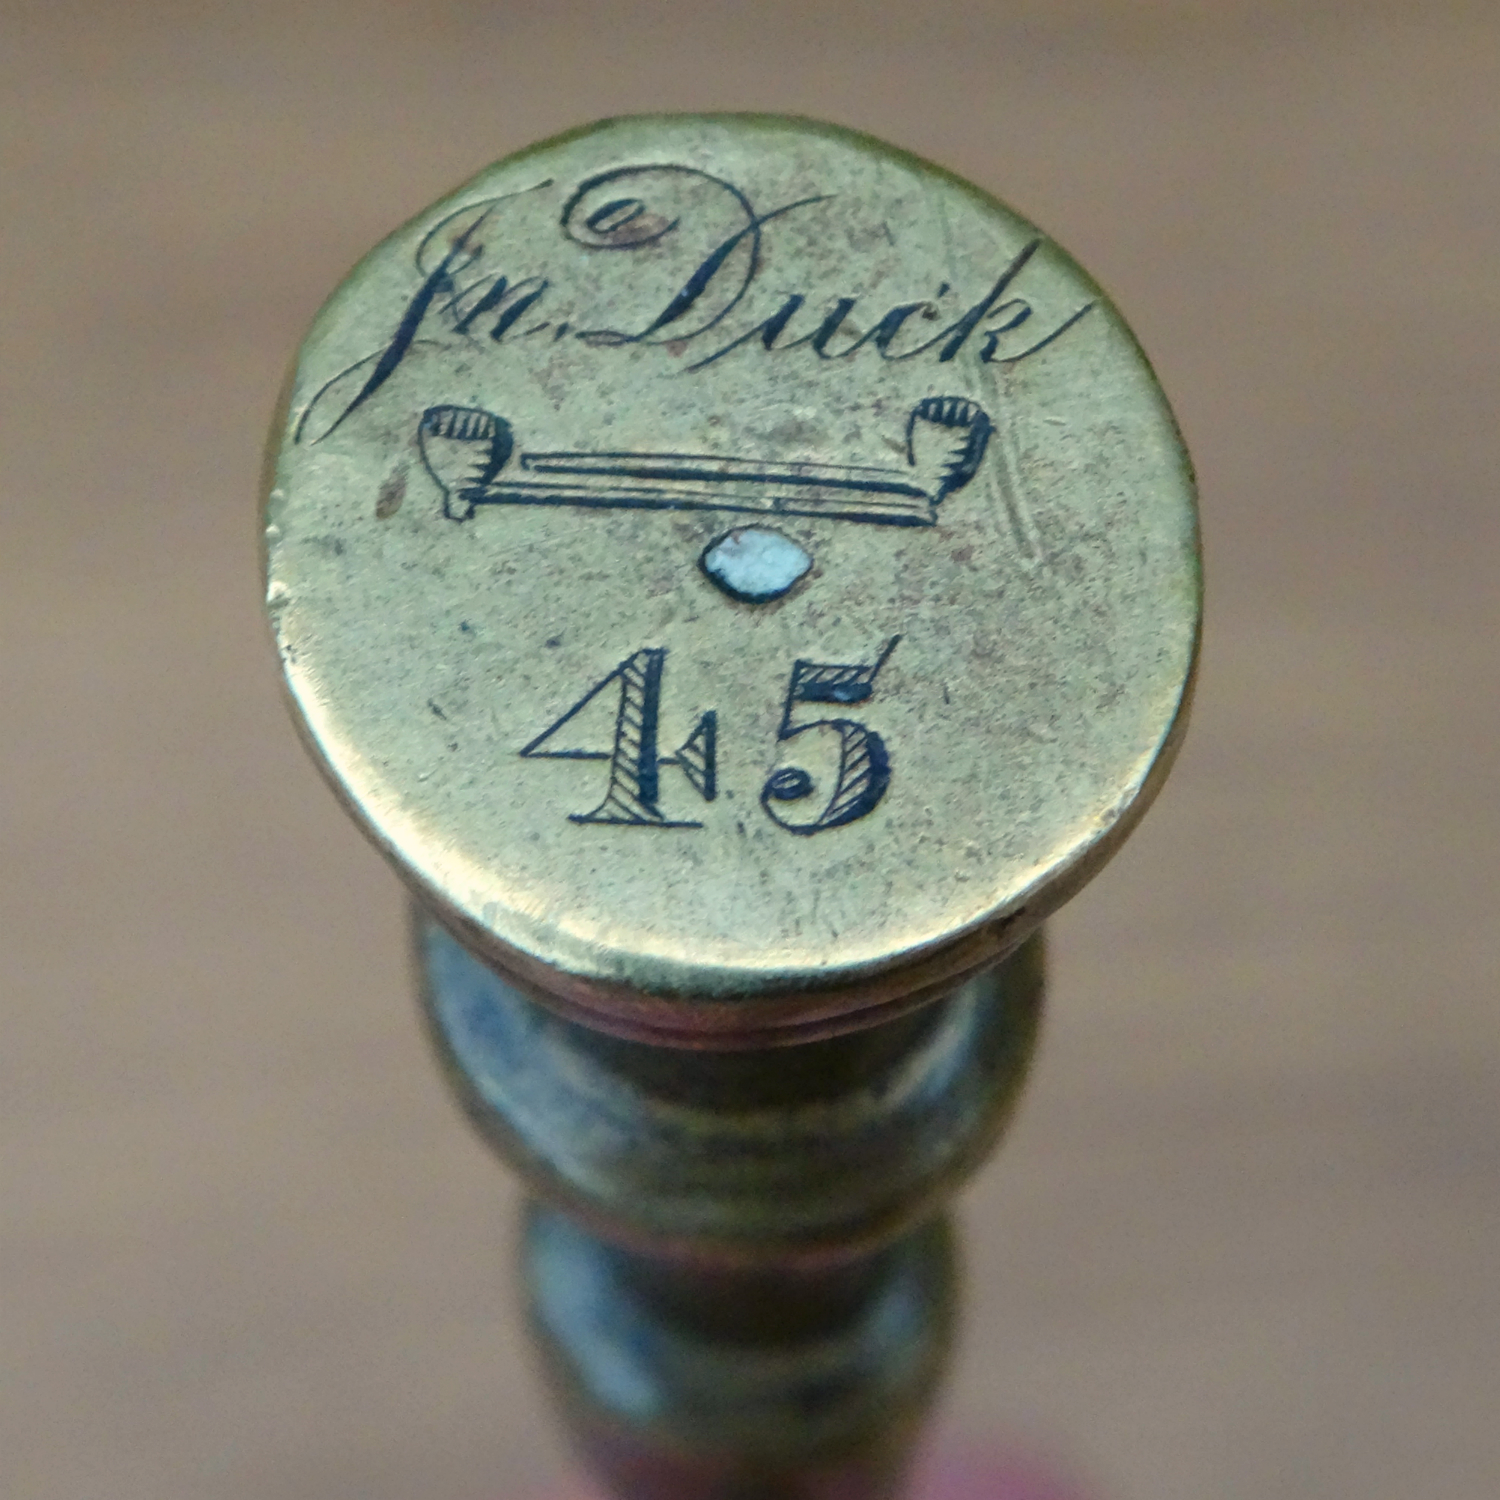 Les tampers ou Bourre pipes  - Page 41 18th-century-pipe-tamper-3